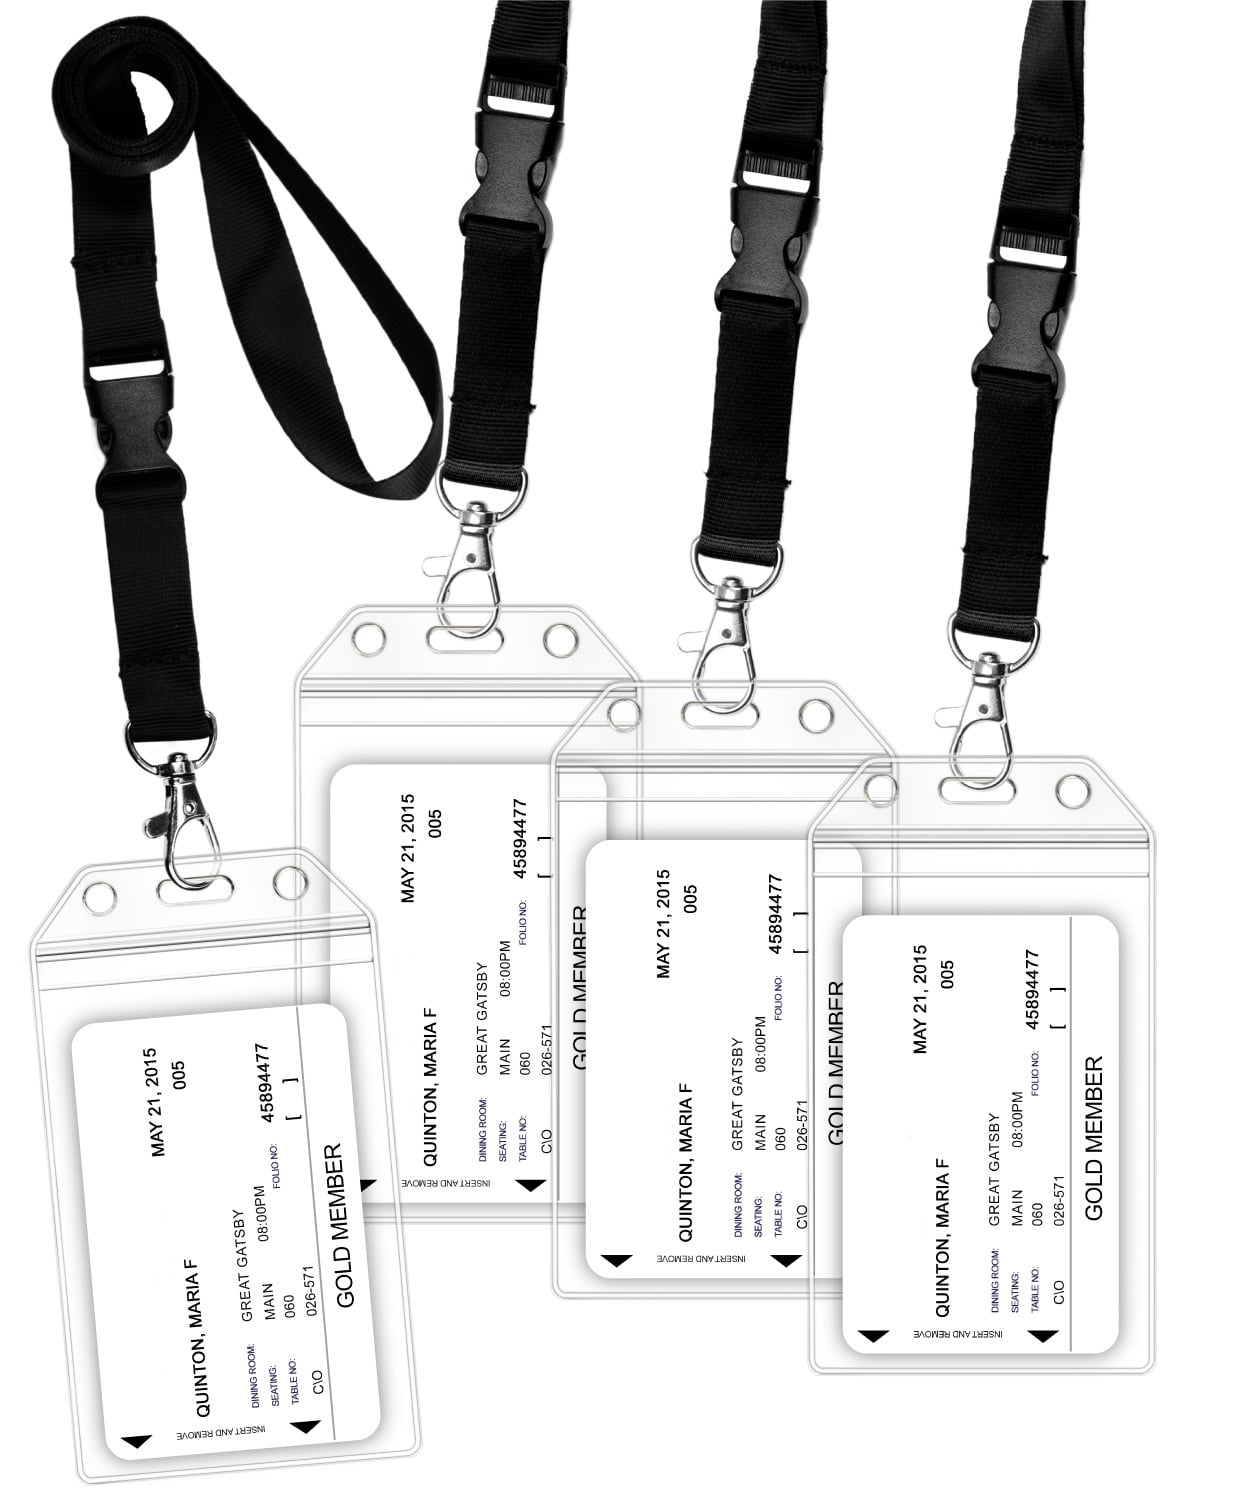 LOT 250 NECK STRAPS LANYARD WITH HOOK BLACK 250 CLEAR VINYL ID BADGE HOLDERS 